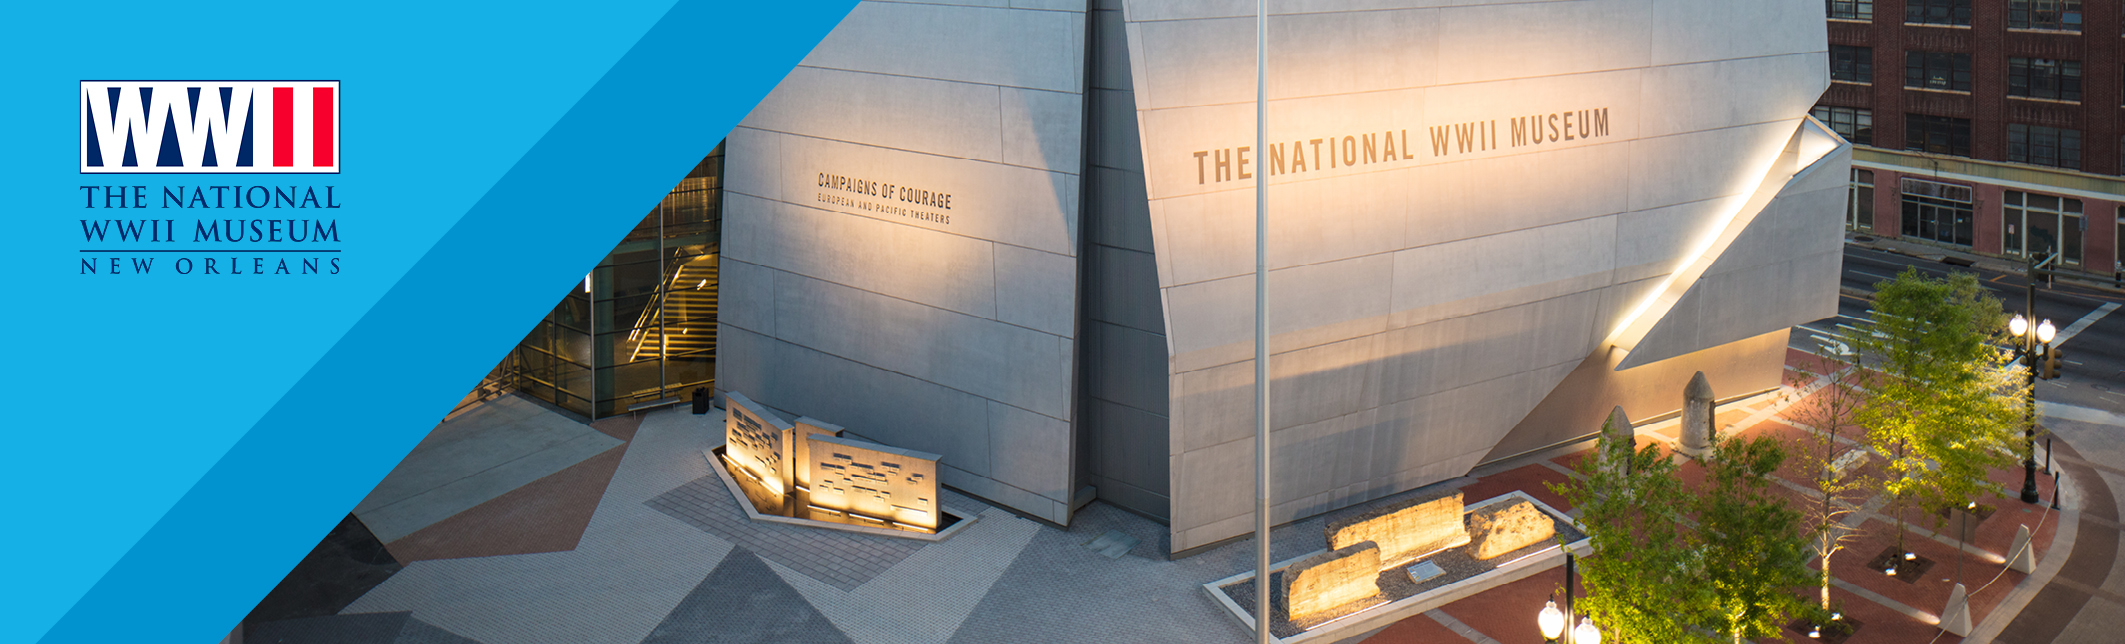 Stephen G. Oswald named to Board of Trustees of National WWII Museum